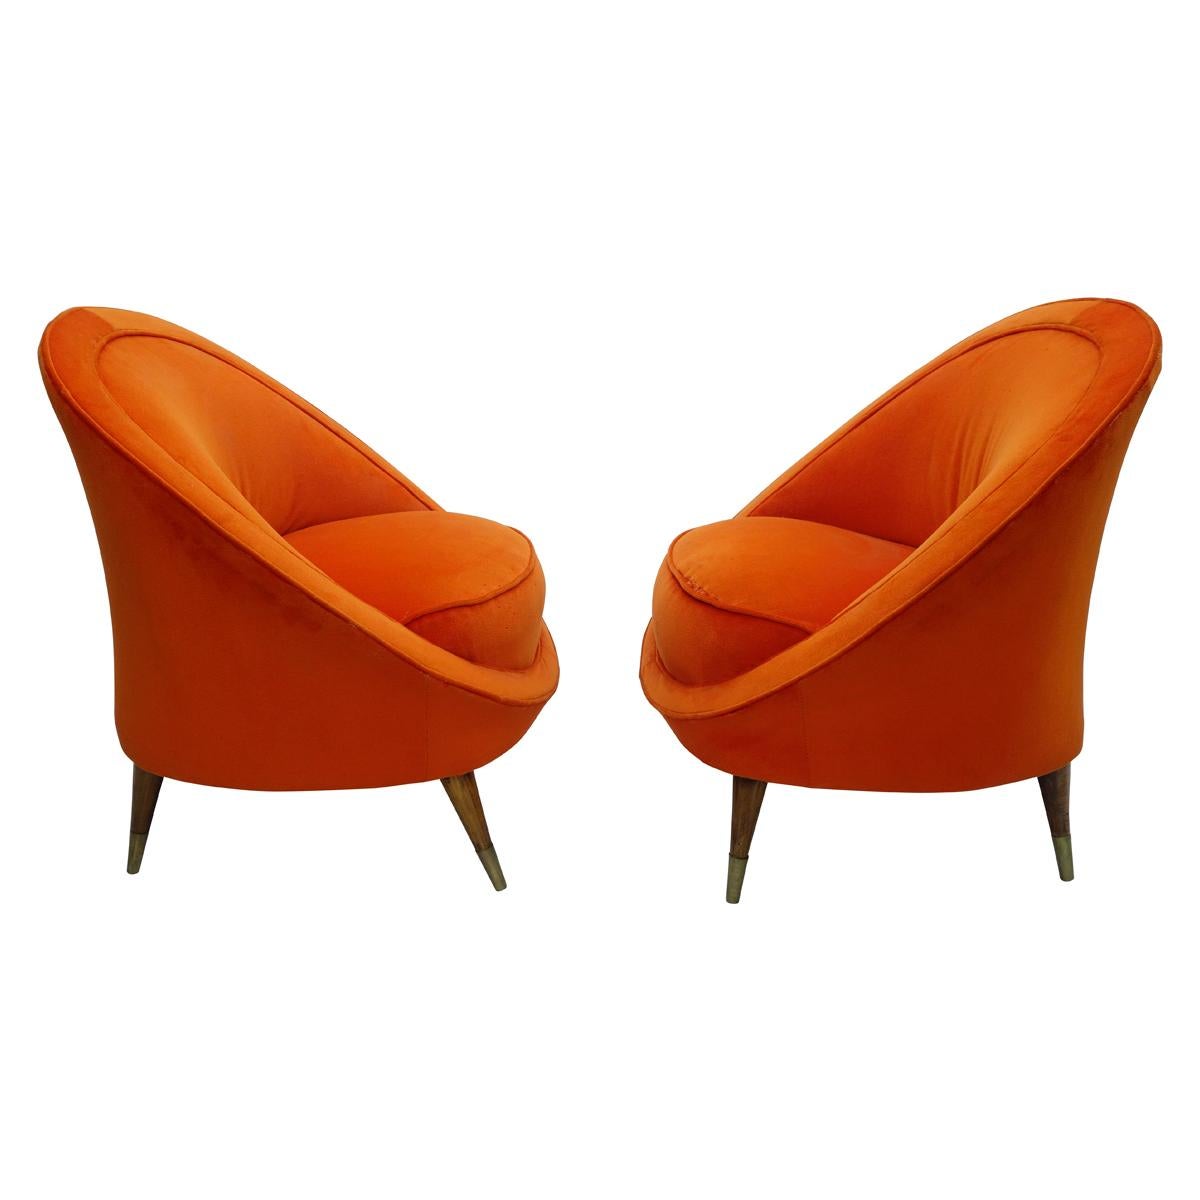 Pair of Italian orange velvet barrel back club chairs in the manner of Gio Ponti. Splayed wood legs with brass 